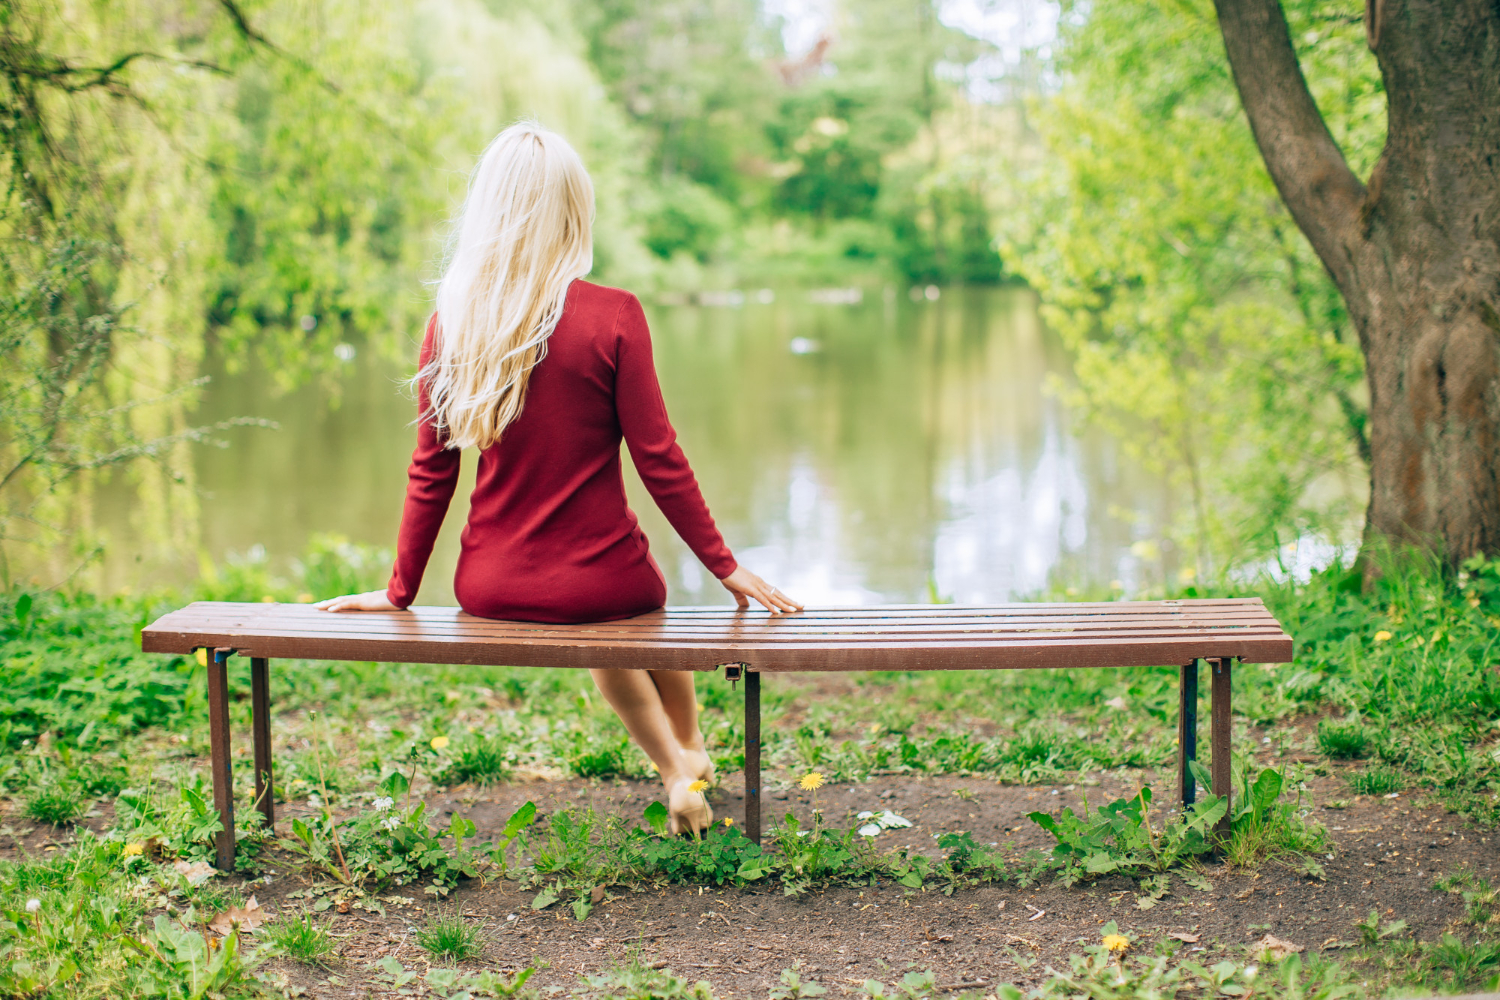 young blonde woman jewell red dress sitting bench park with lake view